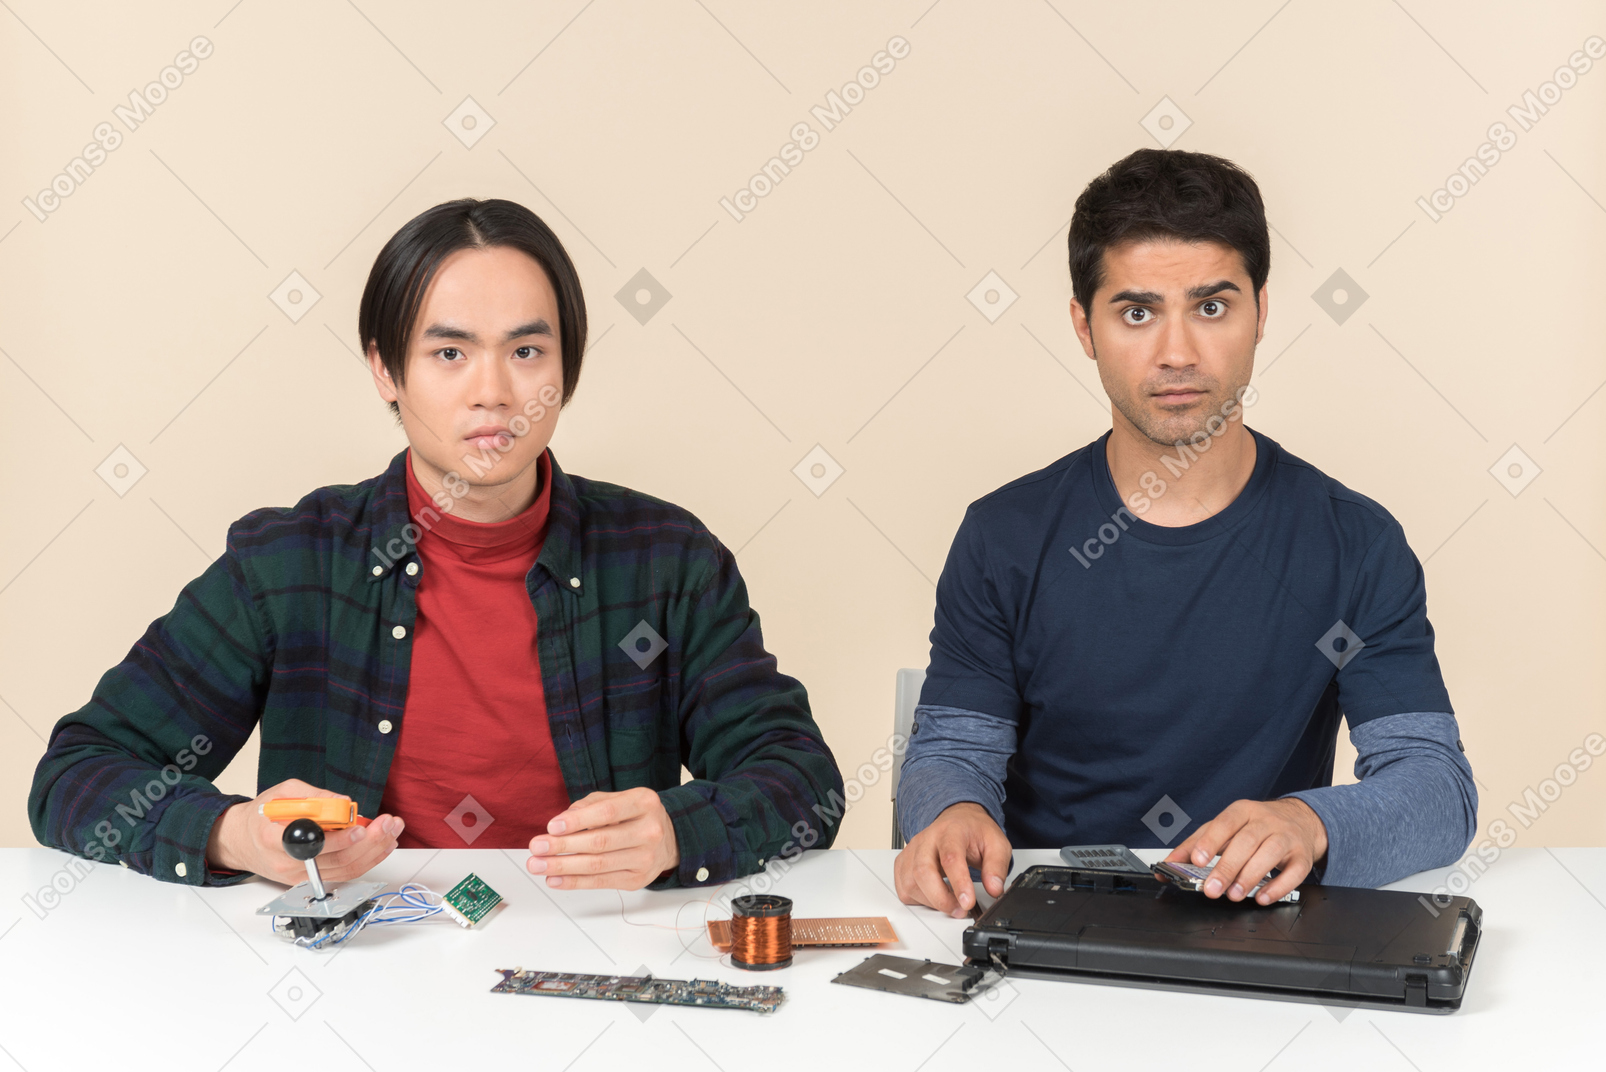 Two young geeks sitting at the table and fixing laptop